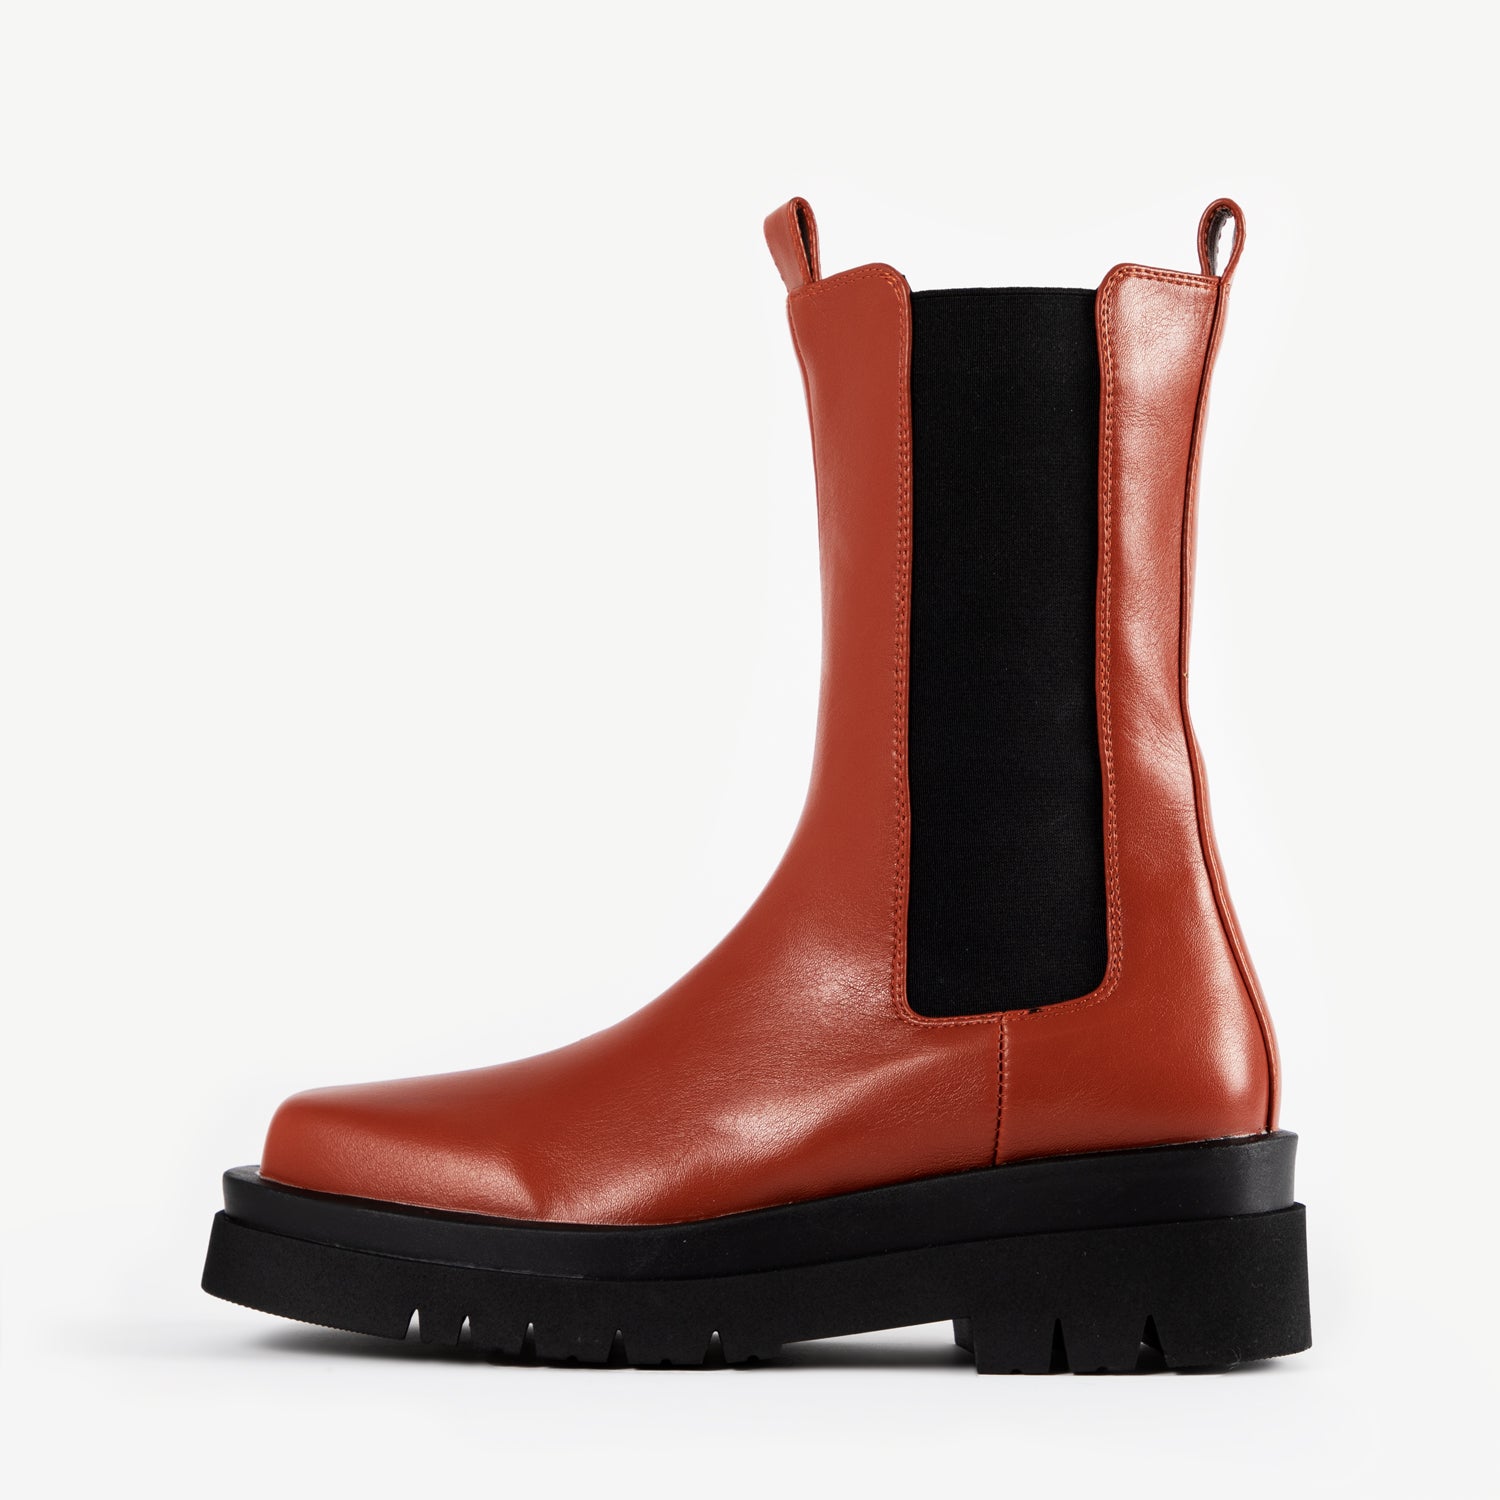 RAID Newport Ankle Boot in Rust